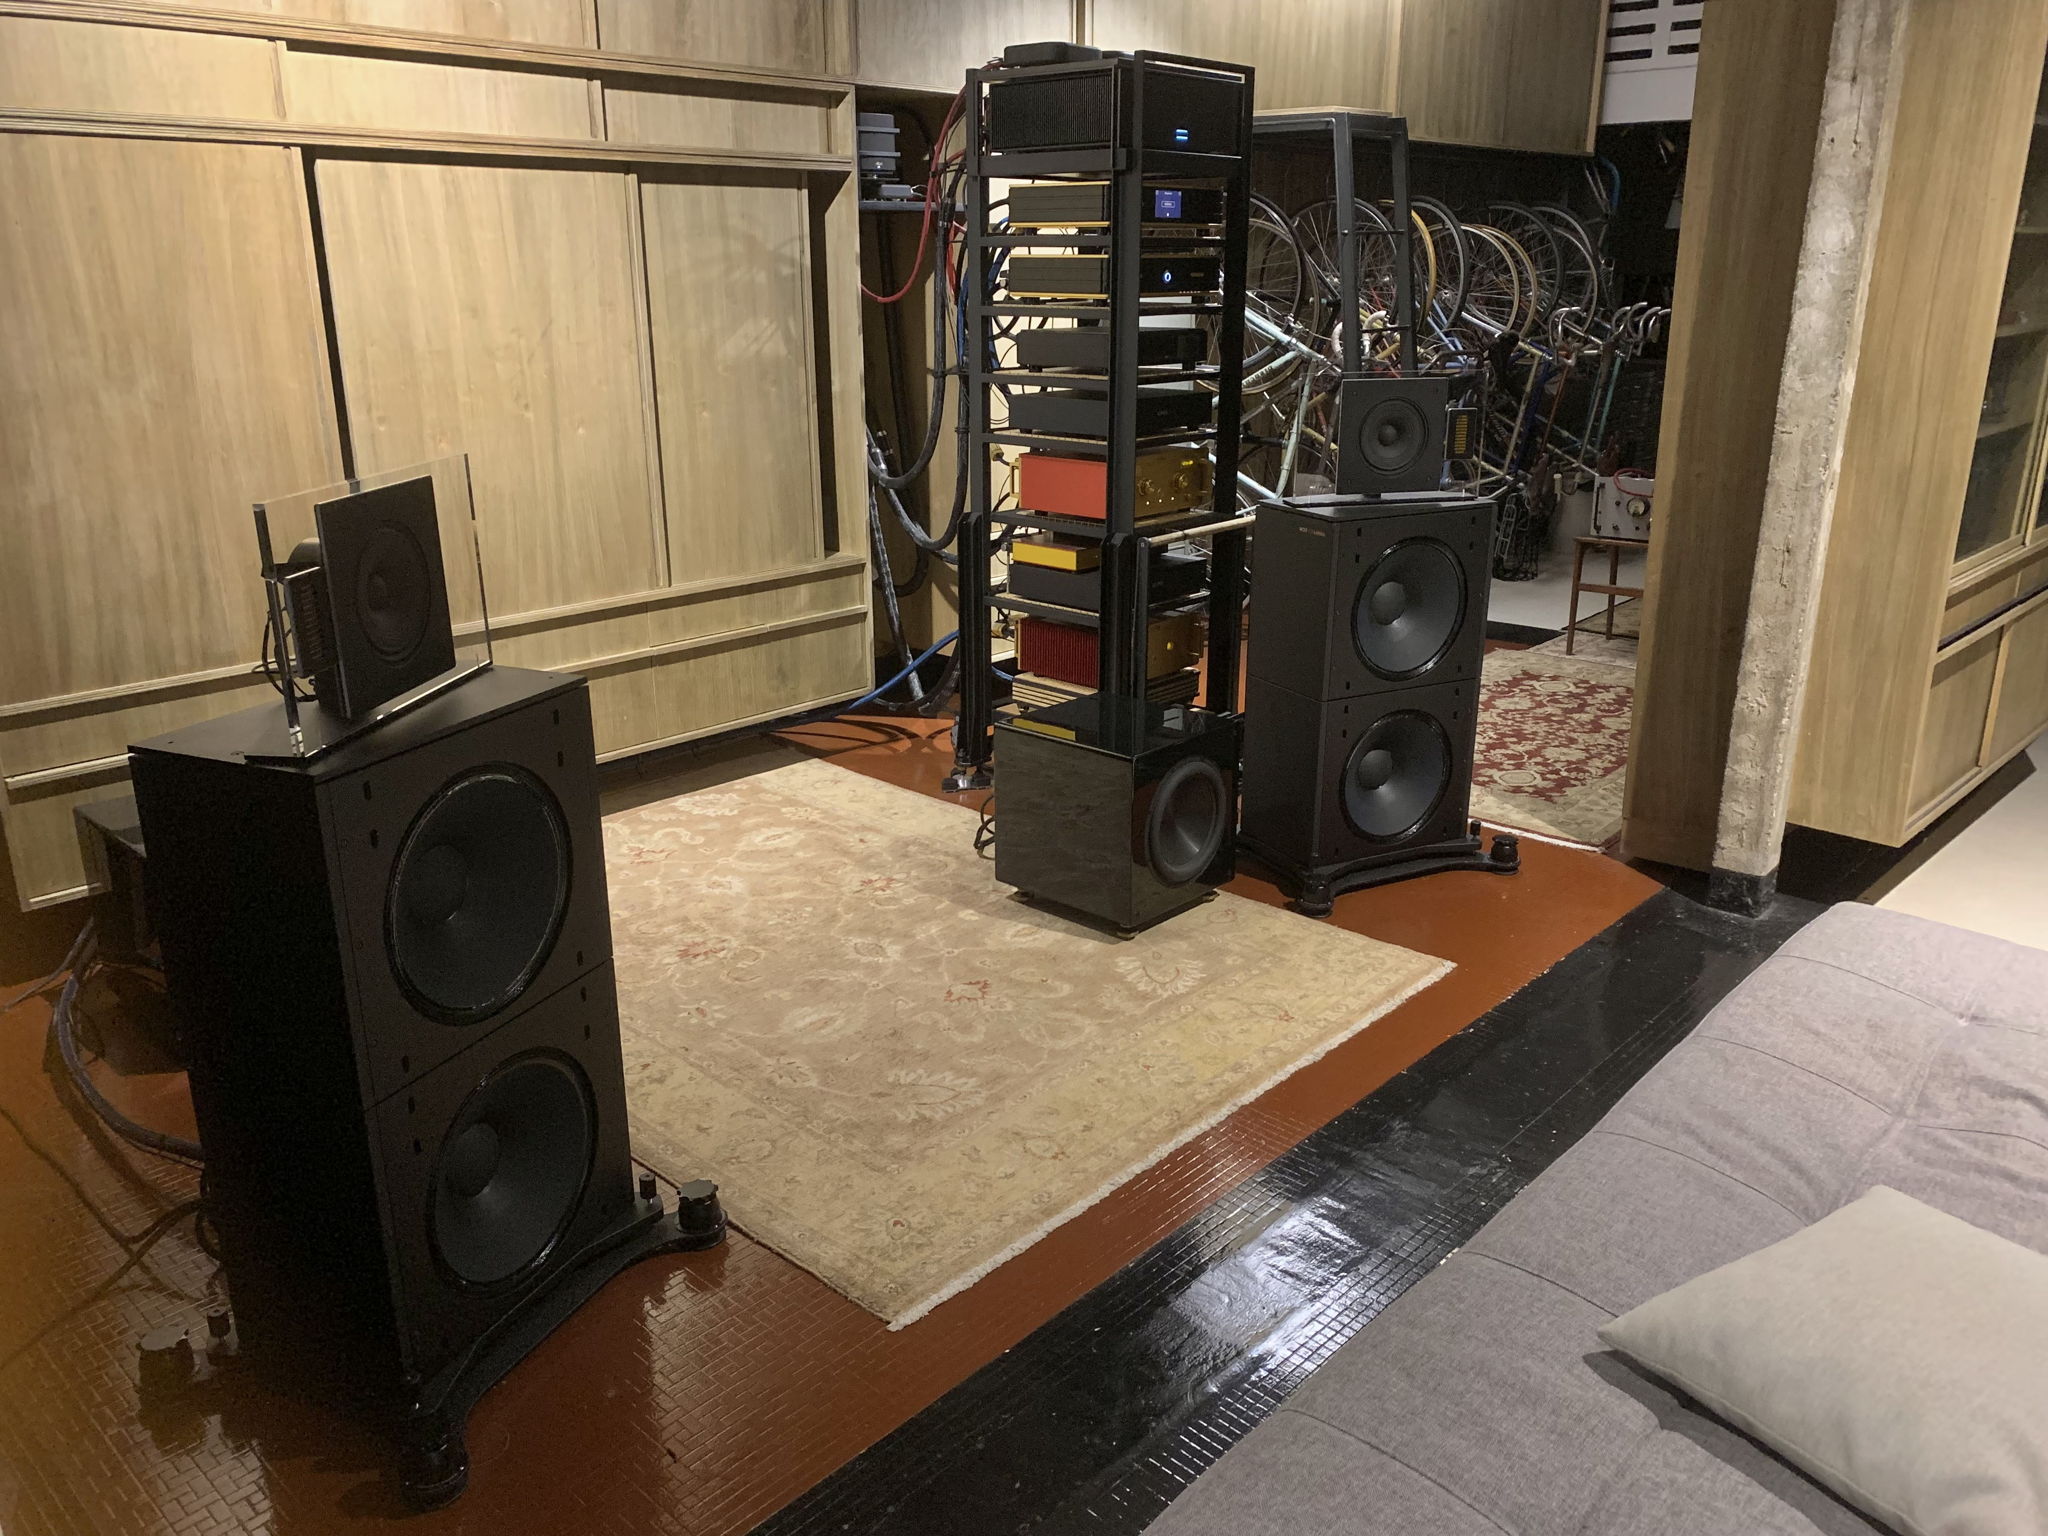 Nearfield listening with field-coil driver dipole speakers simulates realism as rarely experienced. 